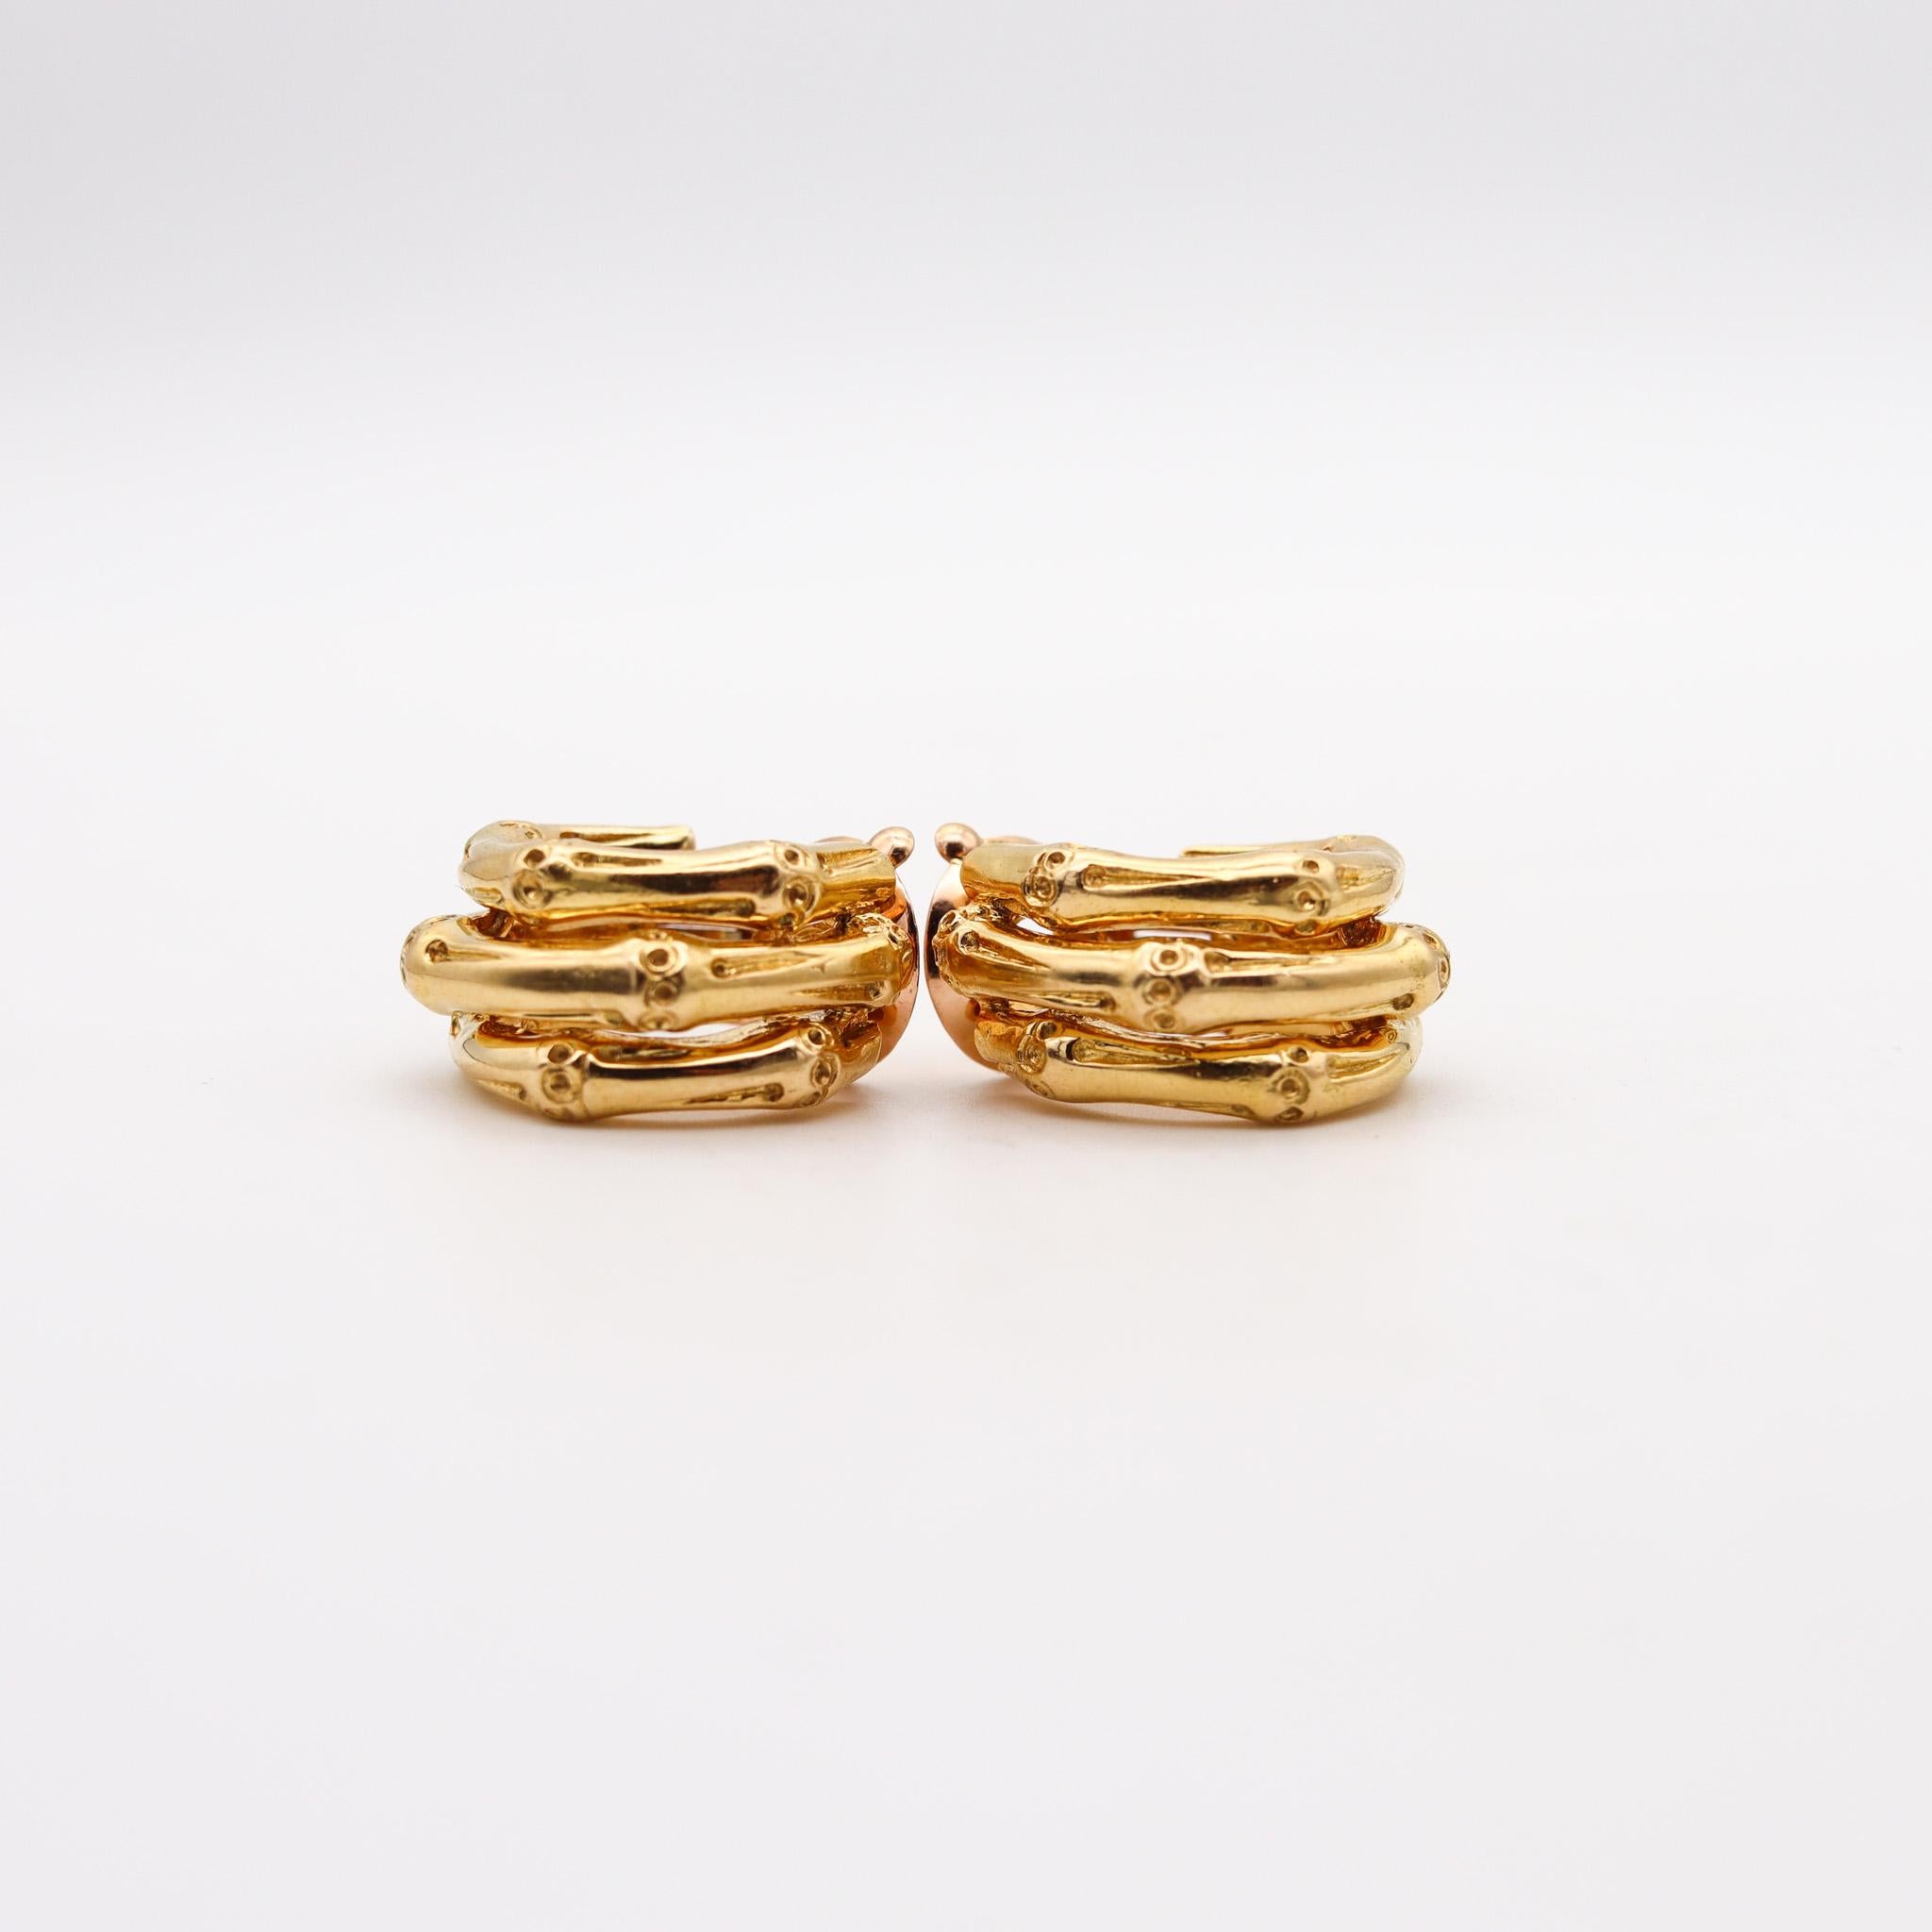 Modernist Van Cleef & Arpels 1967 Paris Bambo Clips-On Earrings In Solid 18Kt Yellow Gold